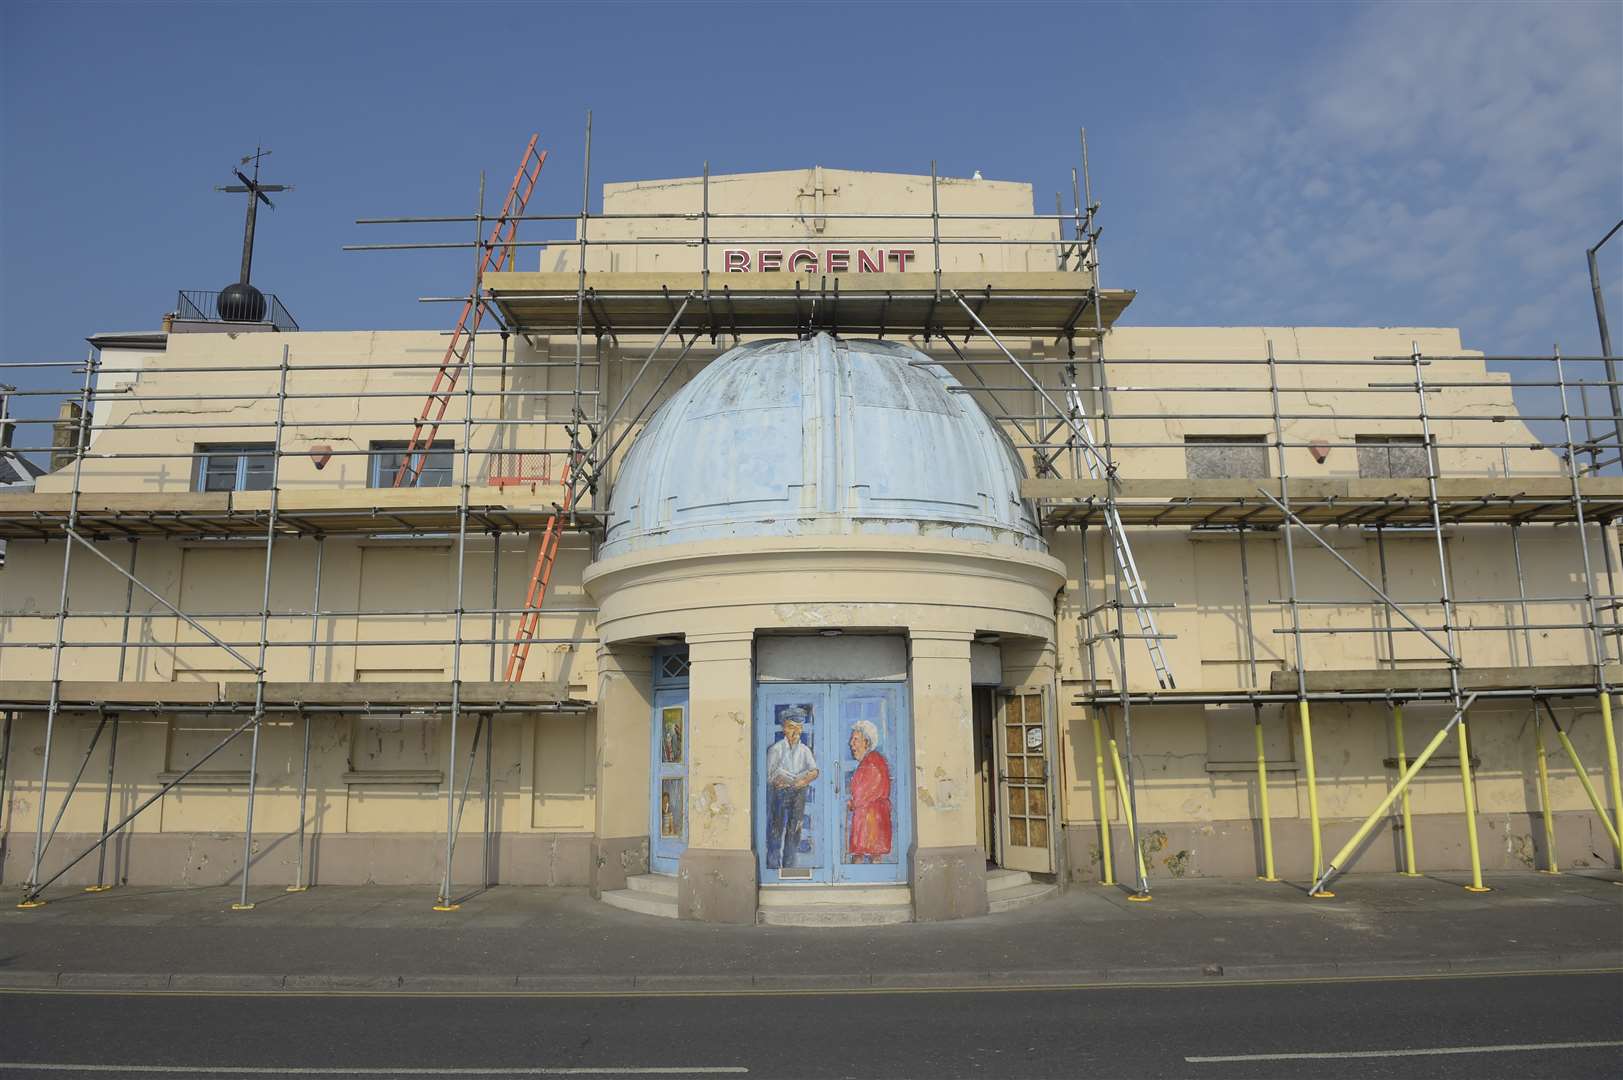 Scaffolding has been erected for remedial works to take place